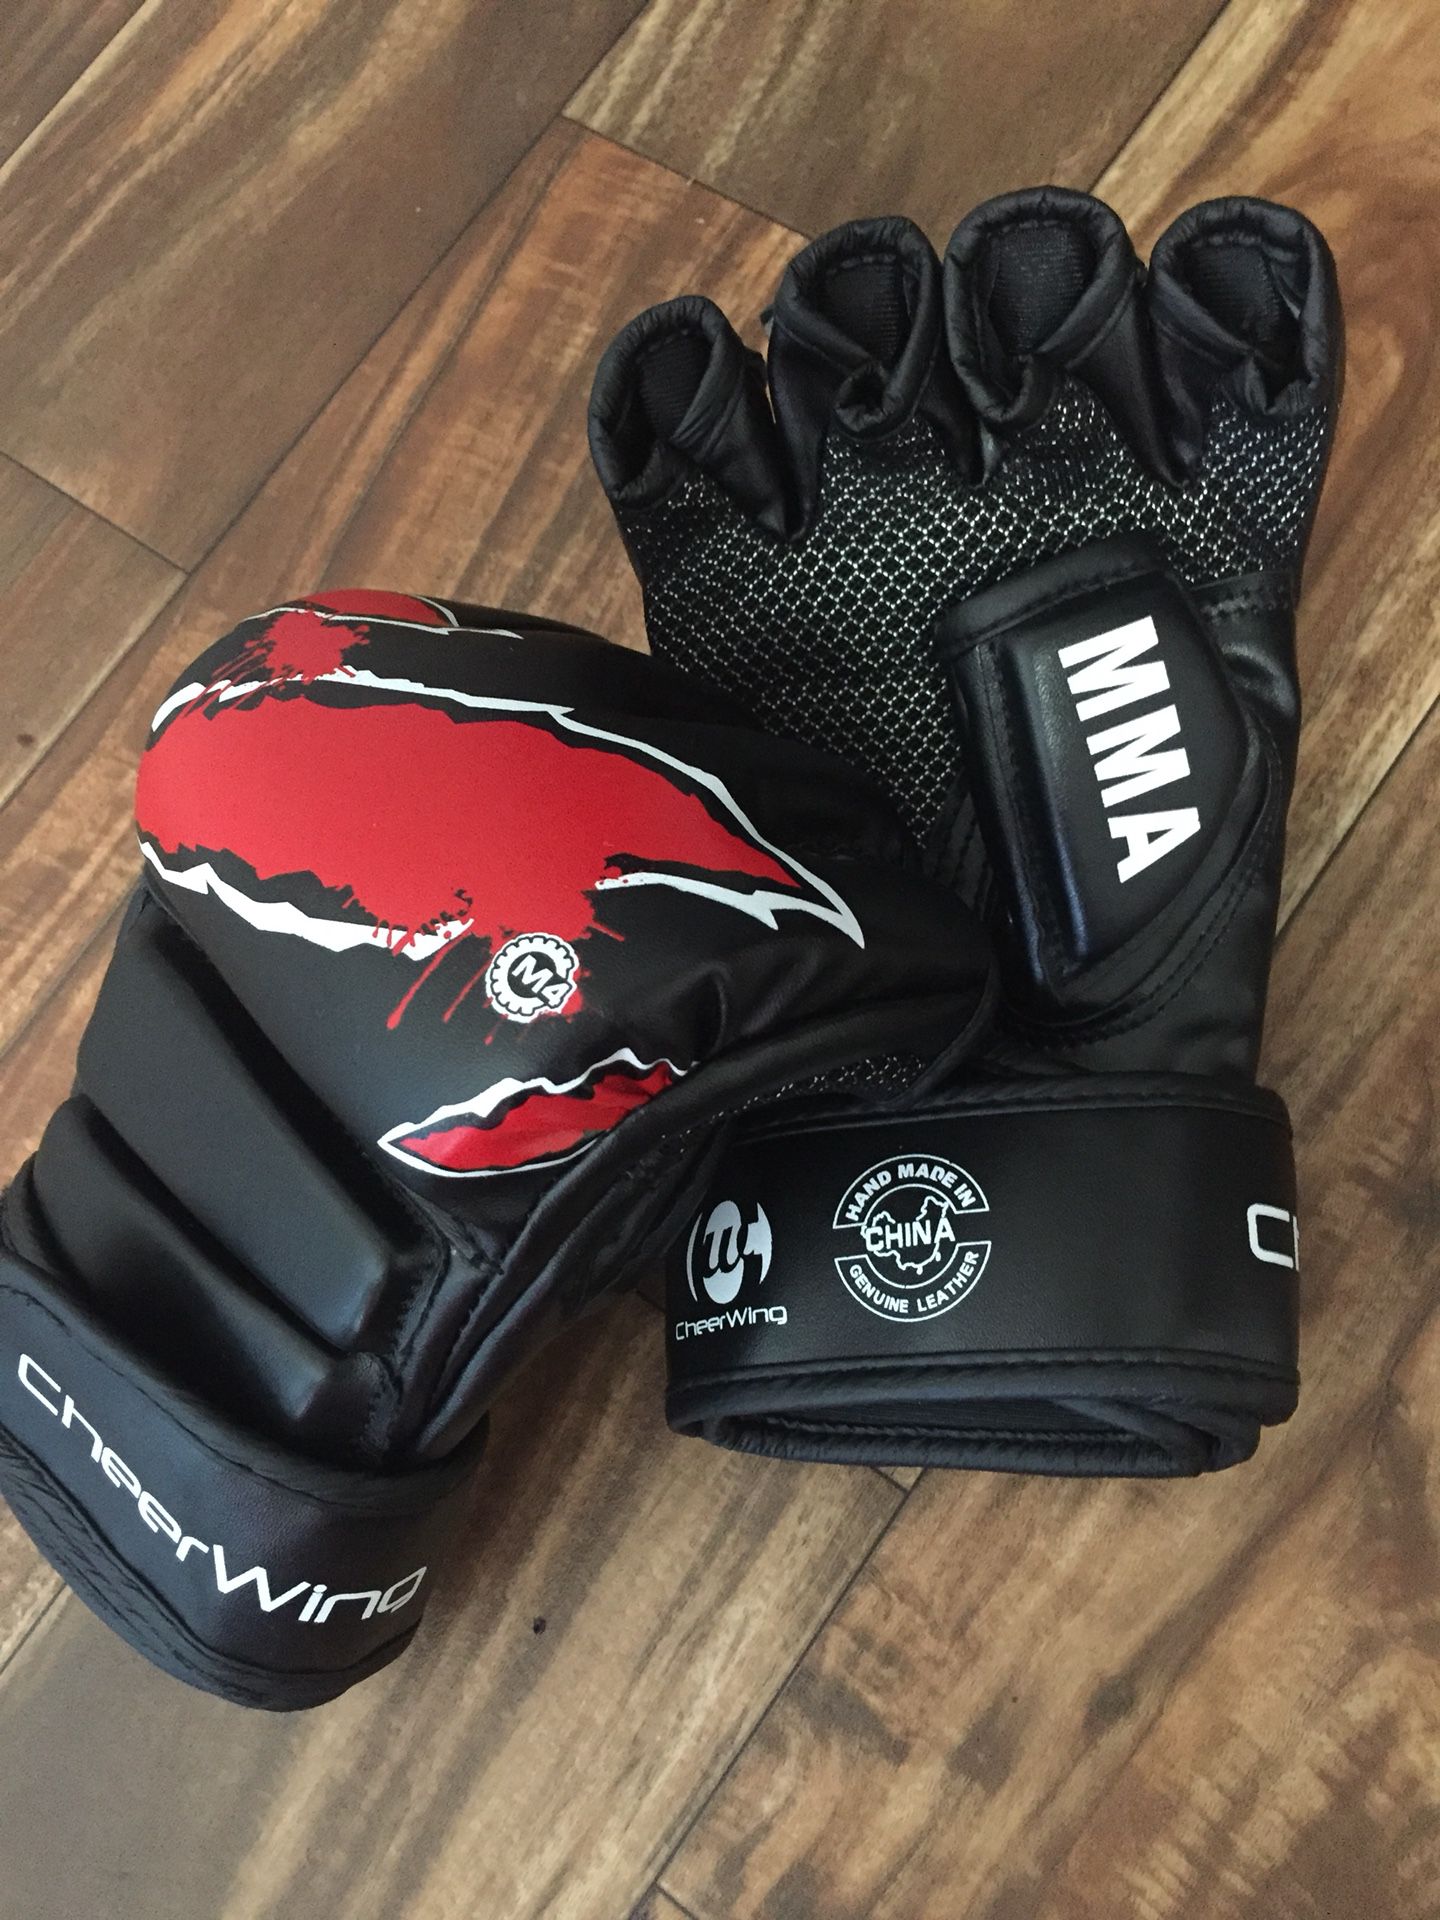 MMA Boxing gloves